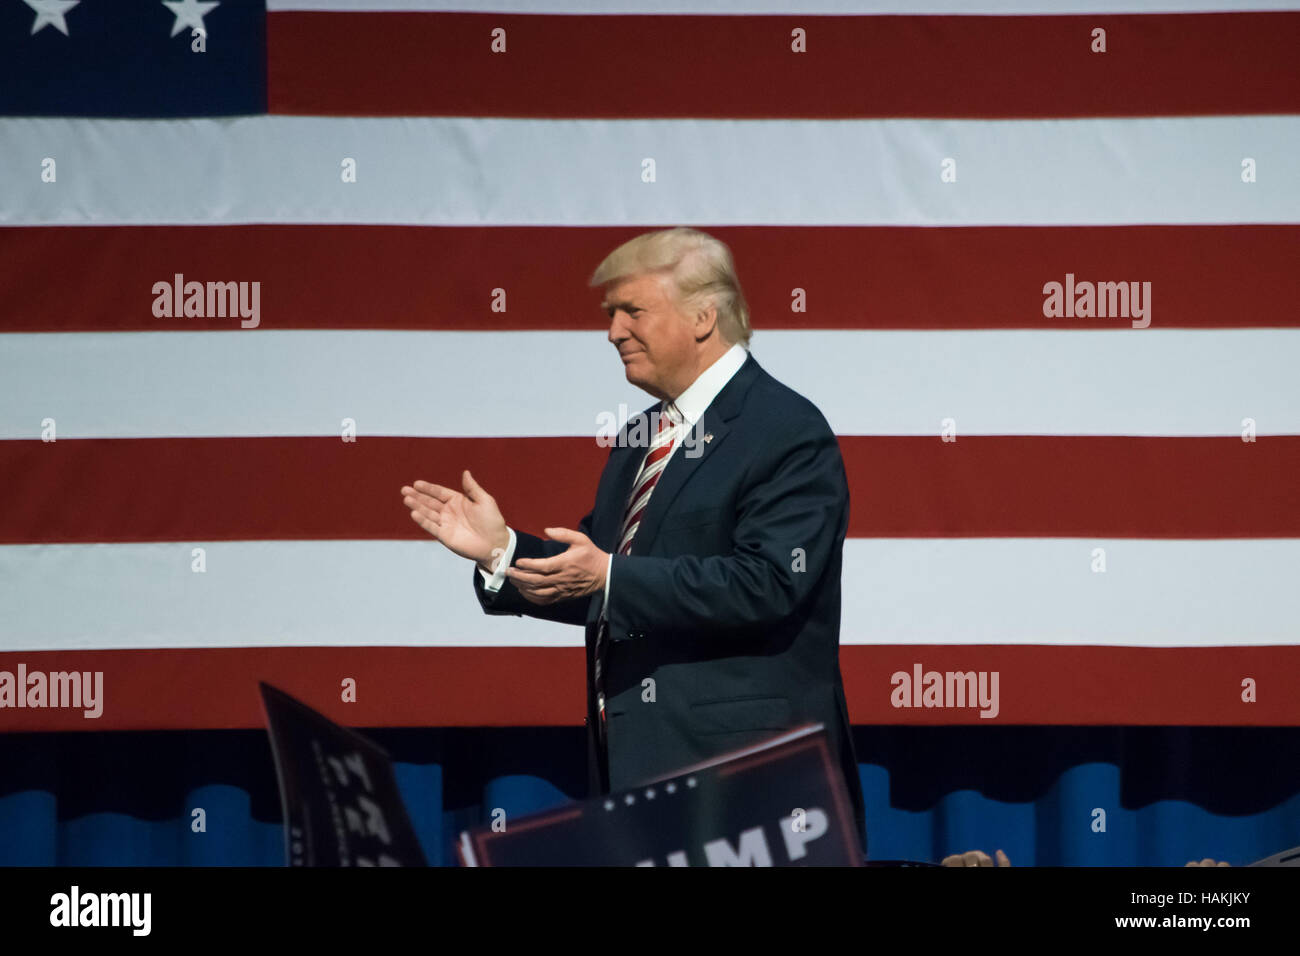 Republican Presidential Nominee Donald Trump walking on stage applauding the crowd near the American Flag. Stock Photo